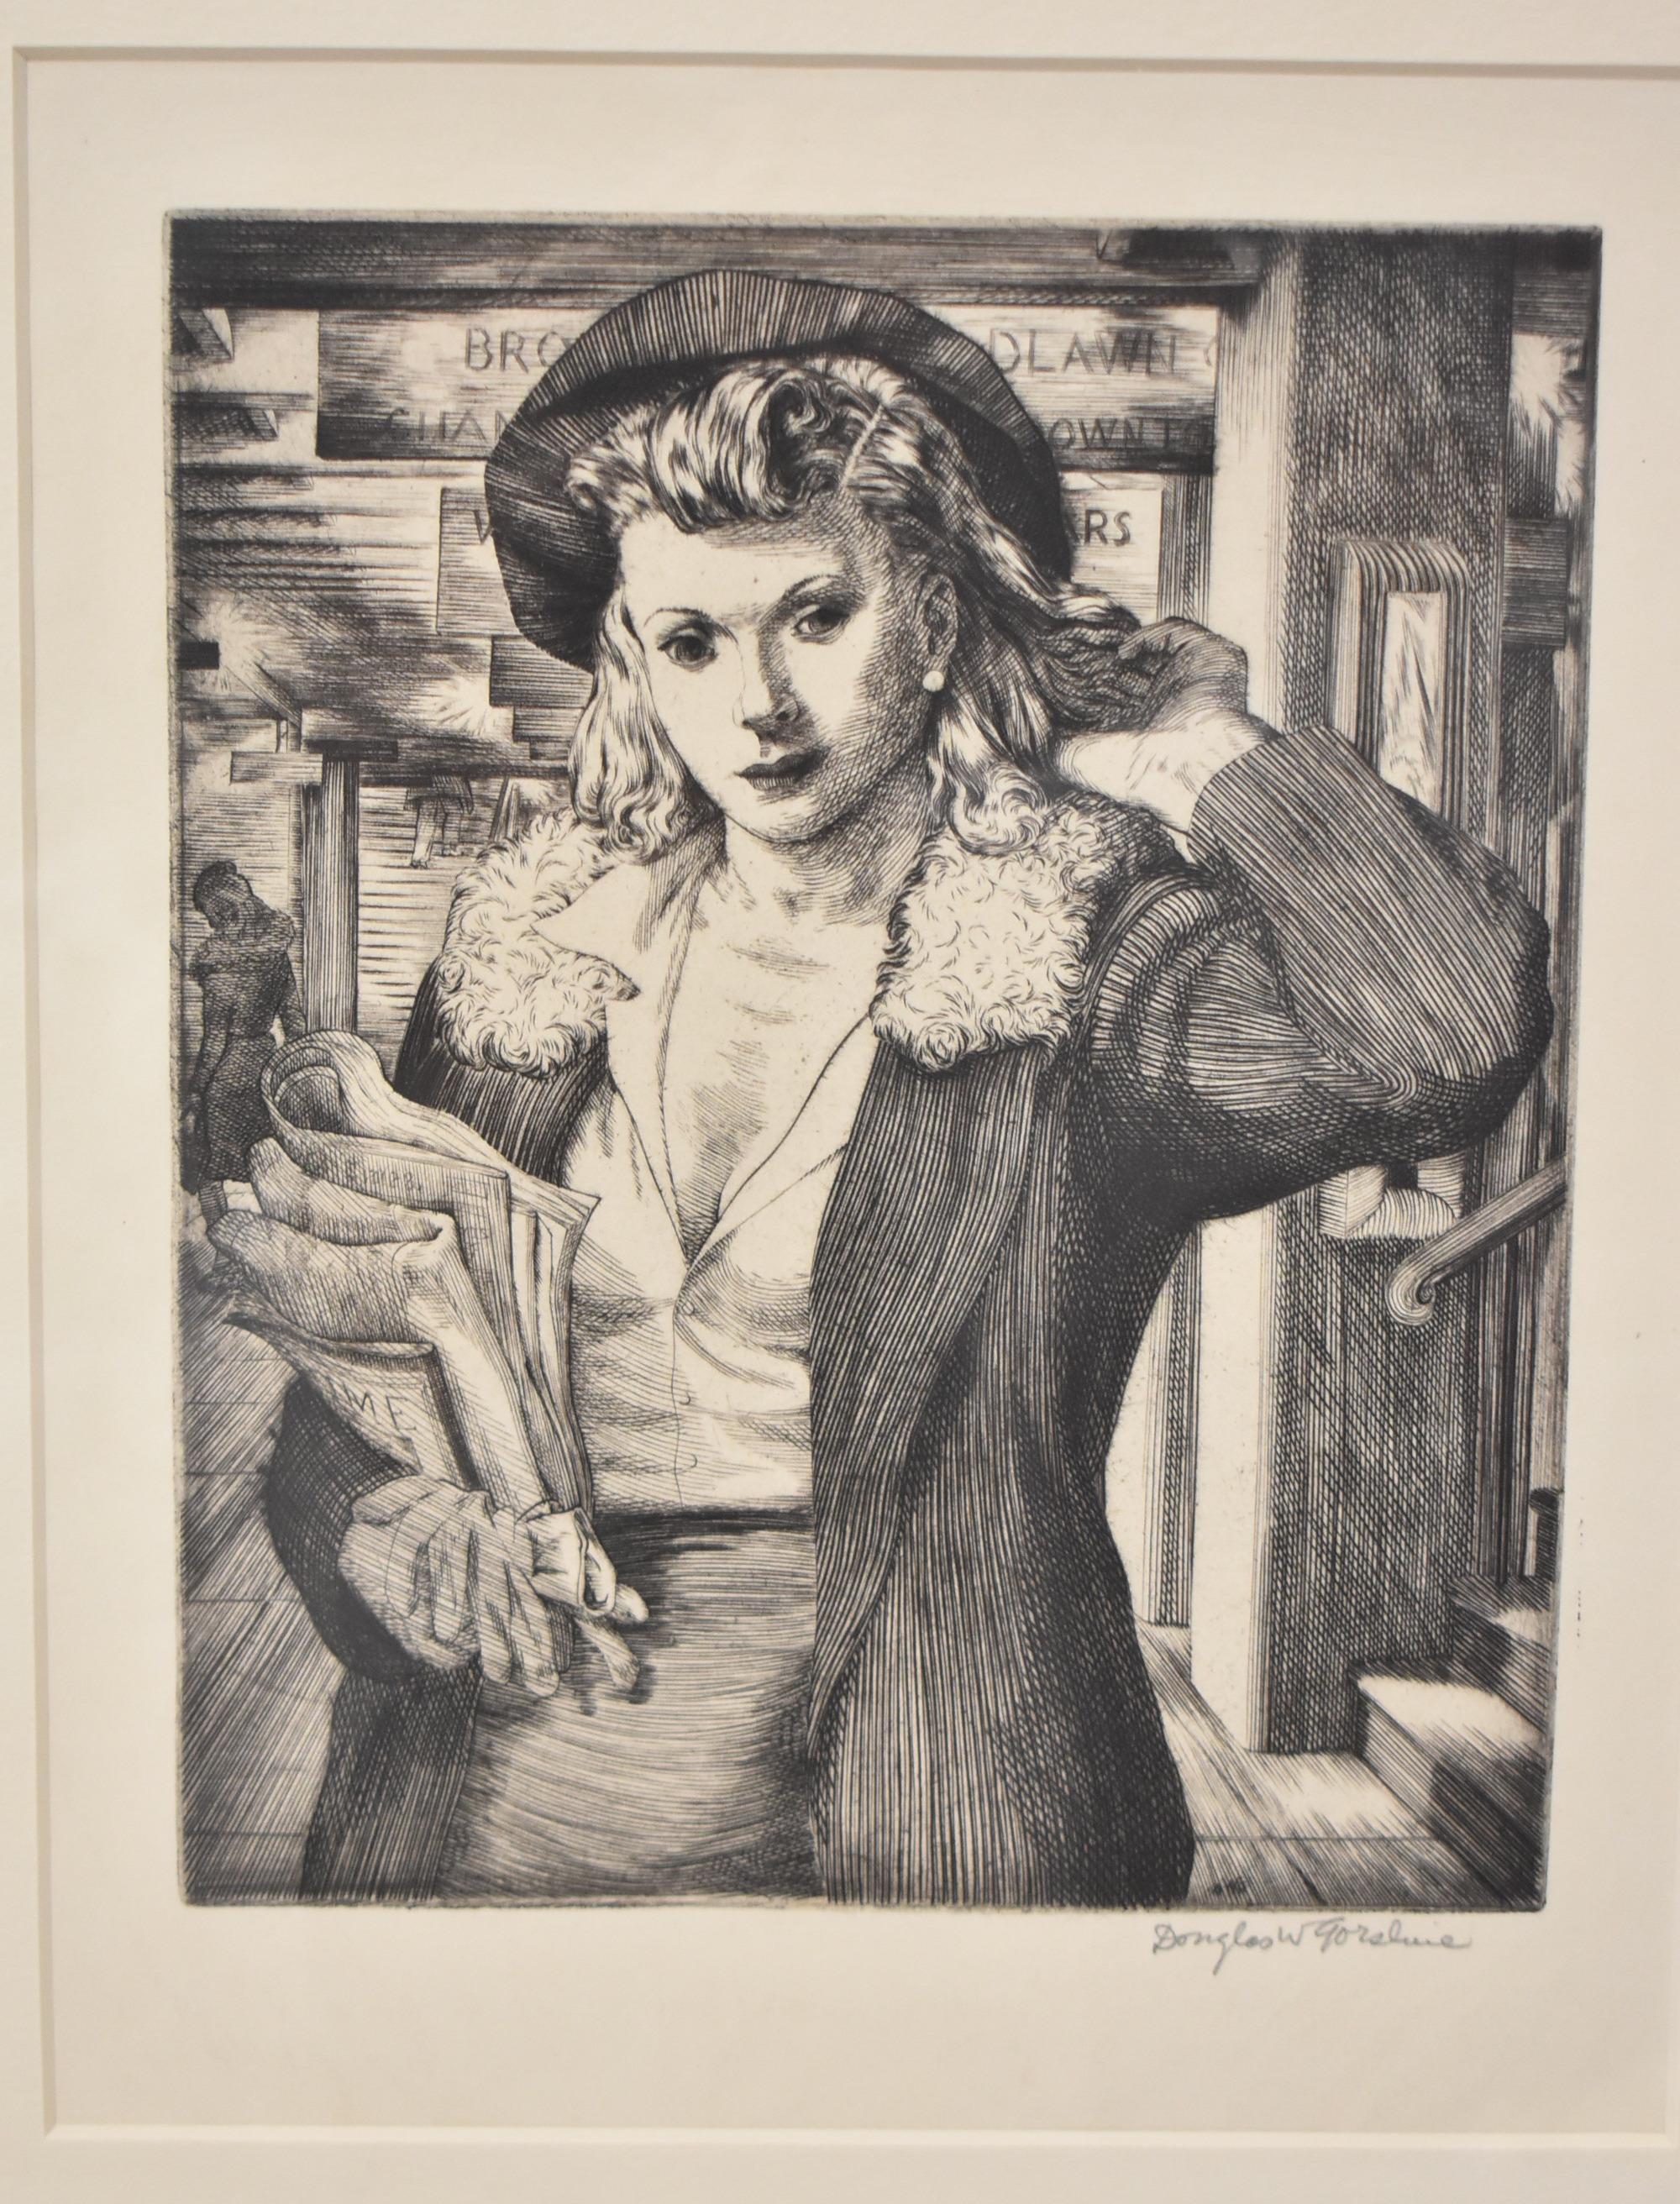 Vintage Douglas W. Gorsline engraving on paper of a young woman, 